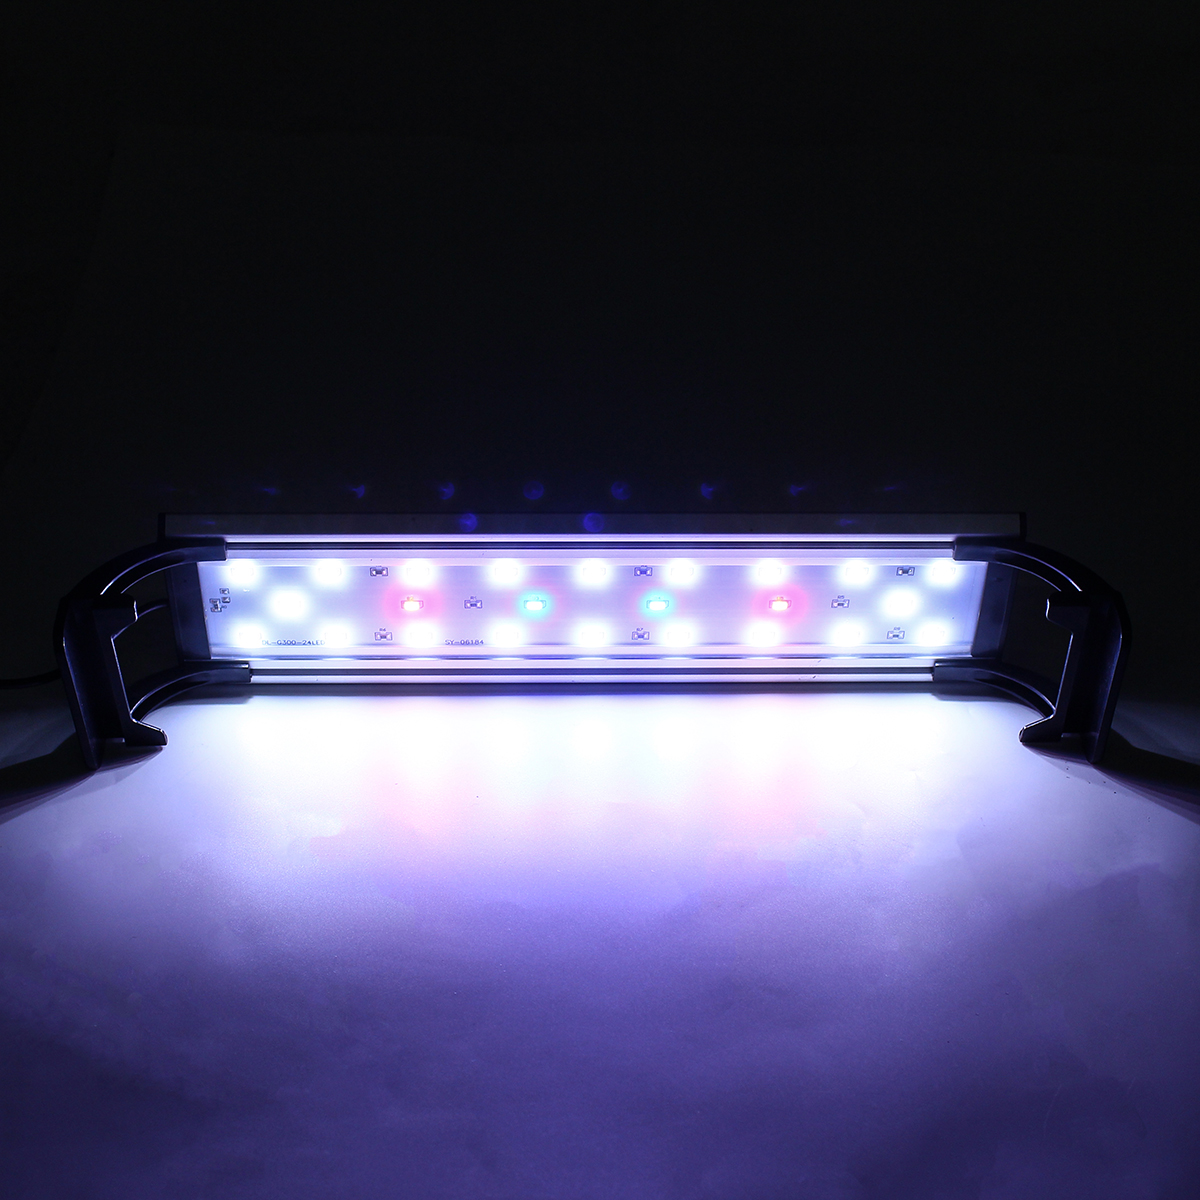 Dimmable--Timer-LED-Fish-Tank-Light-Lamp-Hood-Aquarium-Lighting-with-Extendable-Brackets-for-30CM-Ta-1639937-8